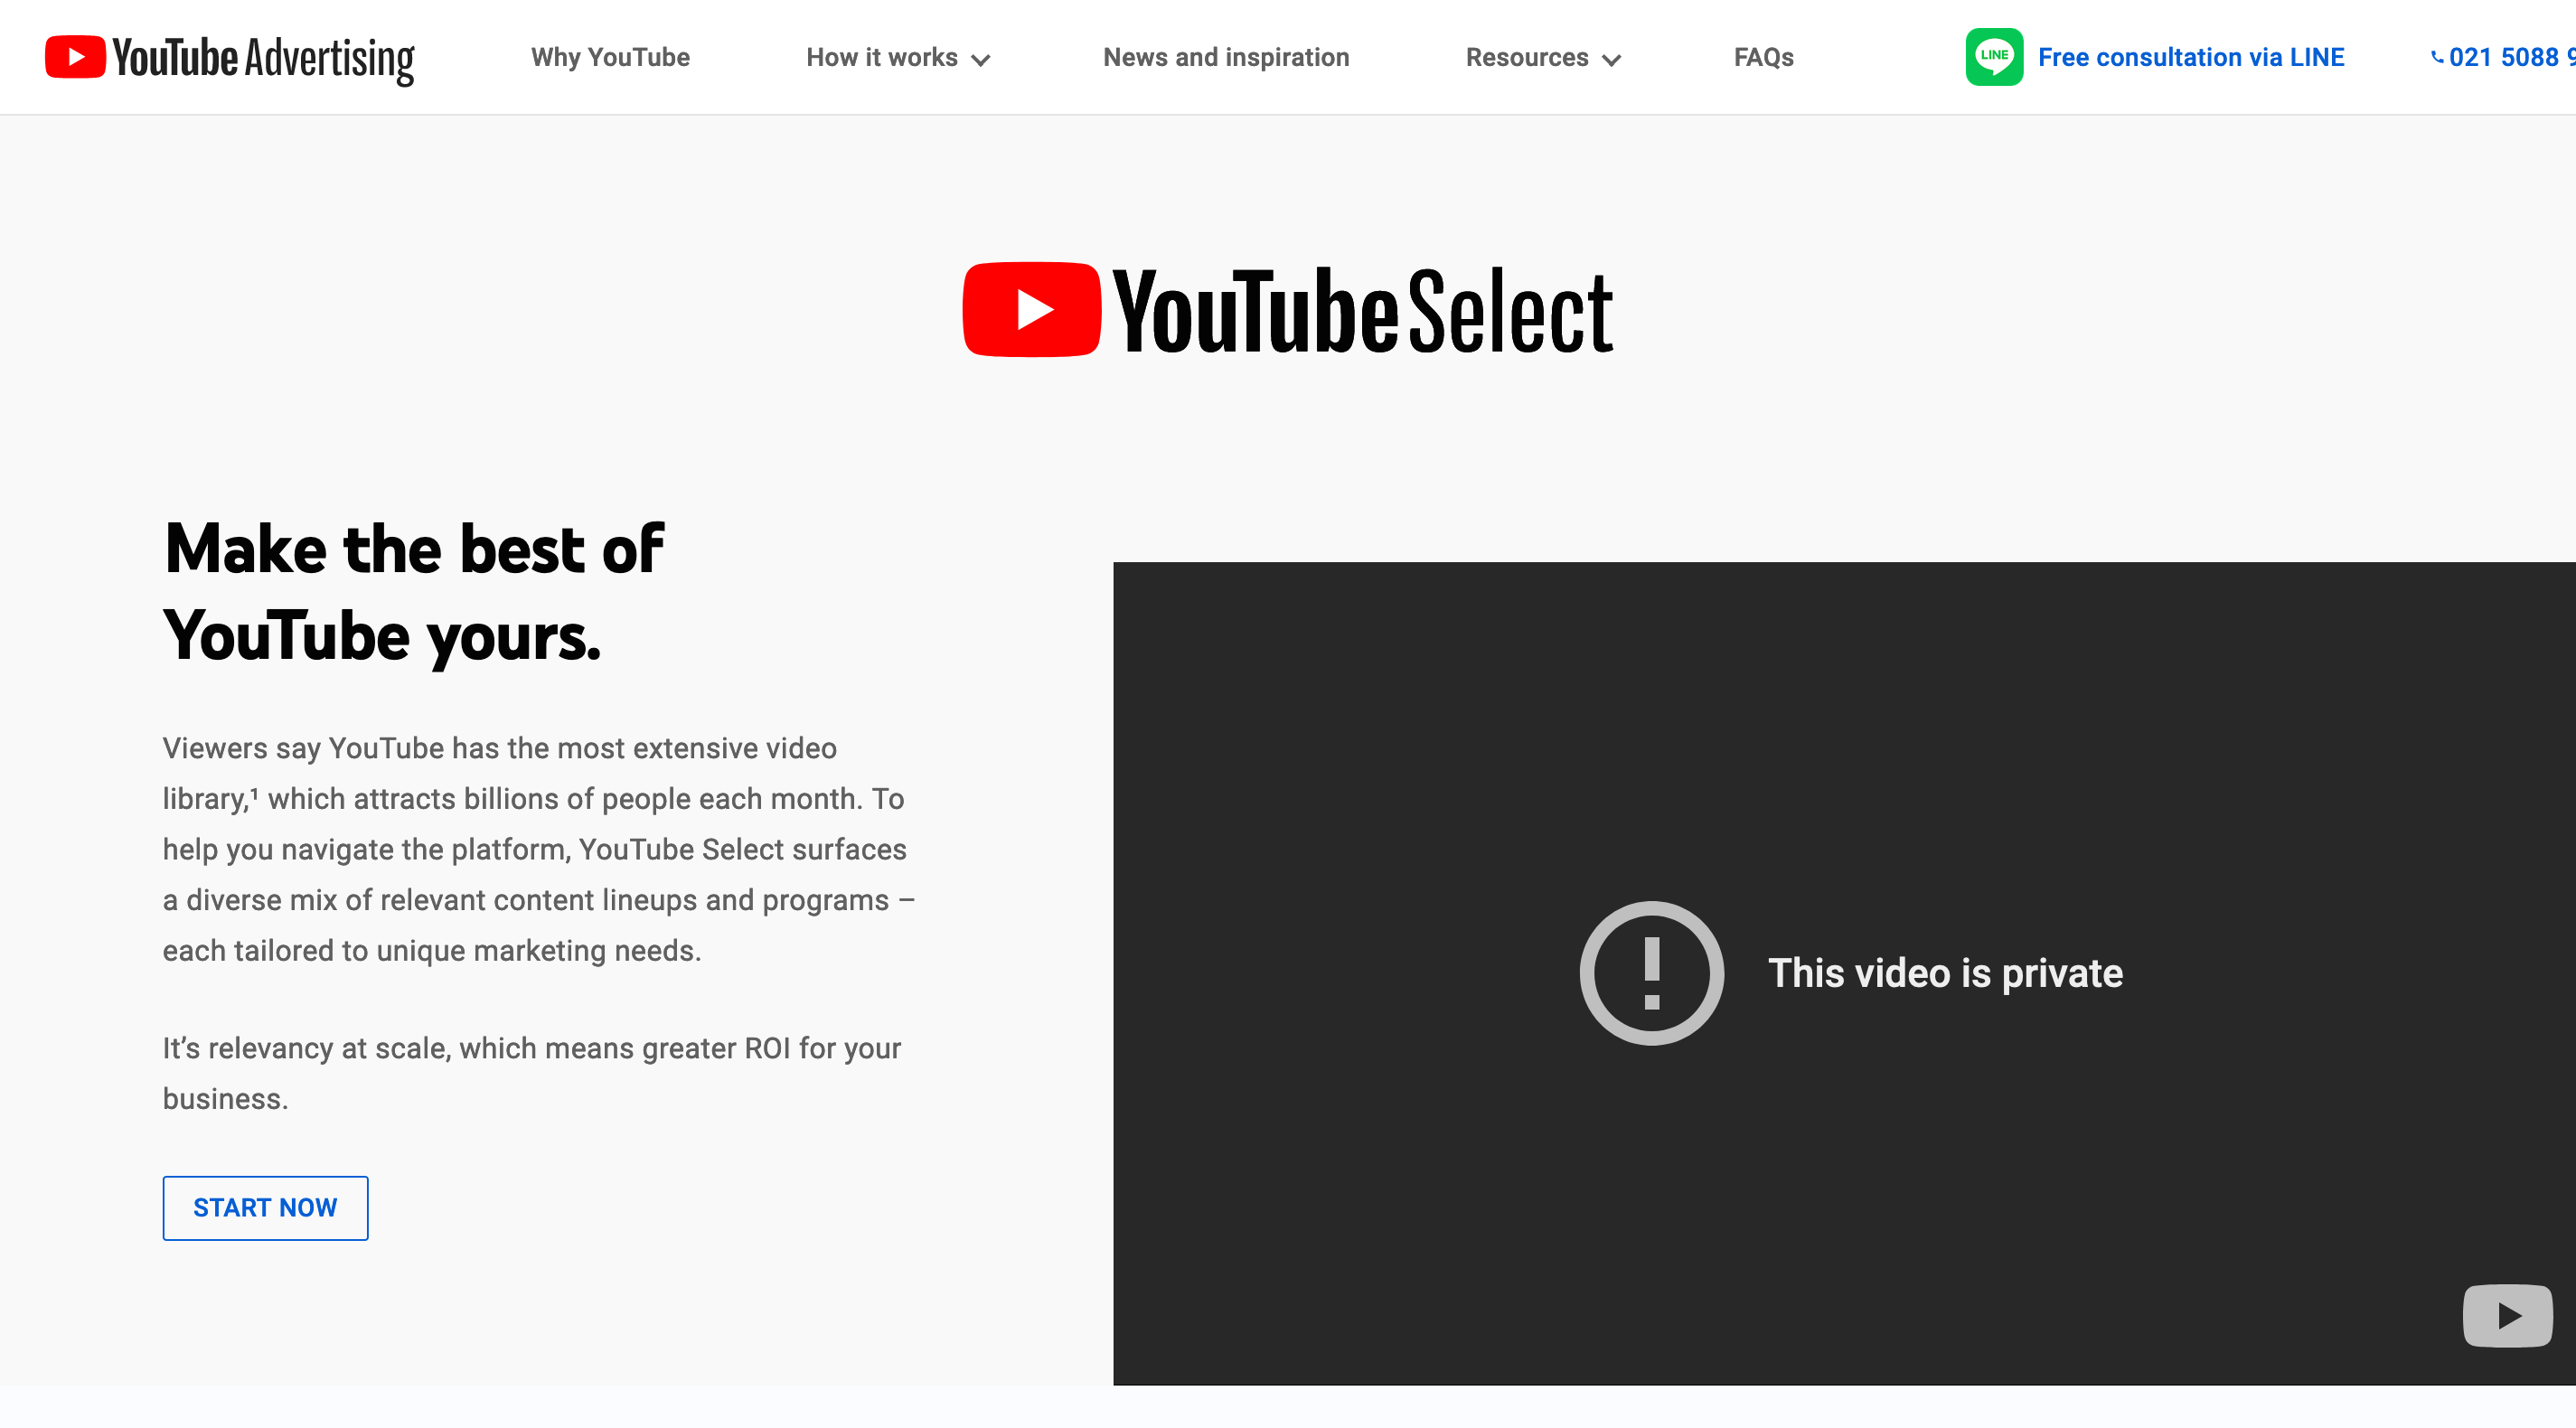 A private video embed in YouTube Select product page.